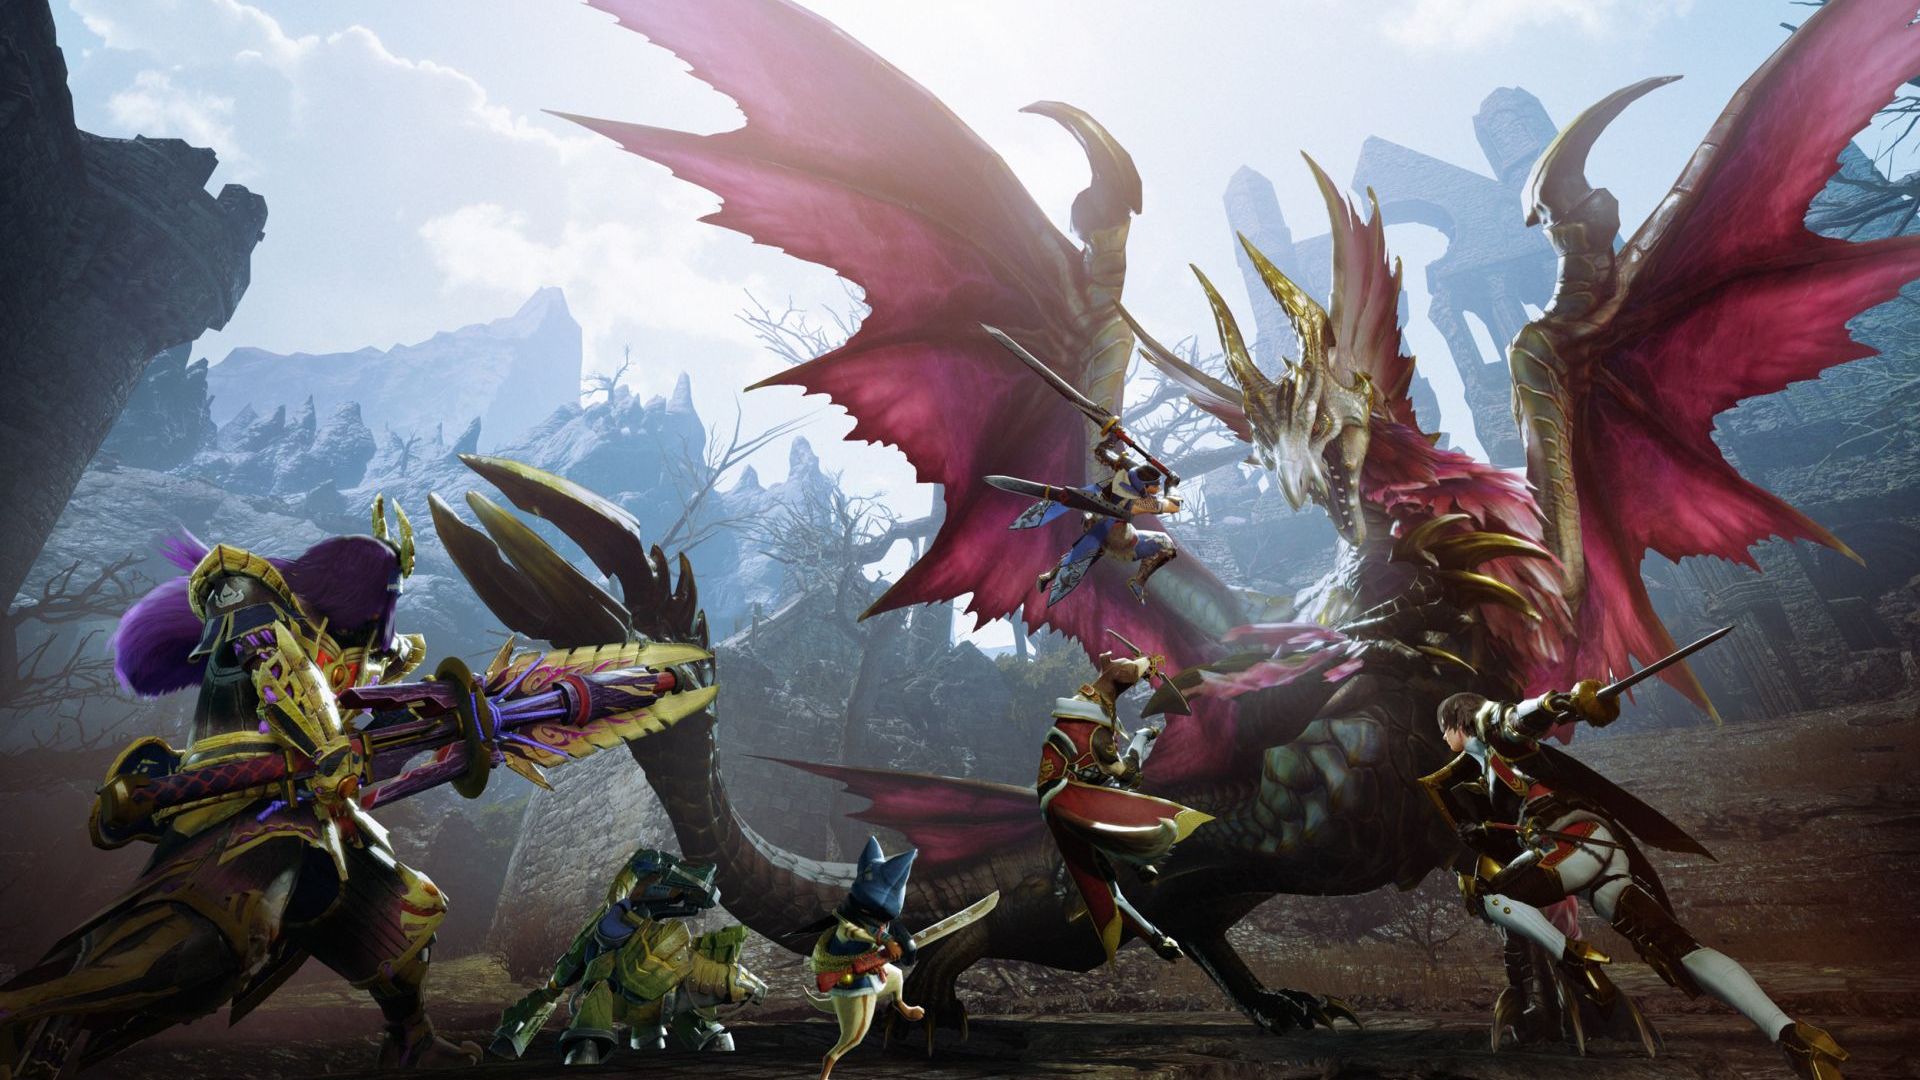 Monster Hunter Rise Review - The rampage grows to more platforms